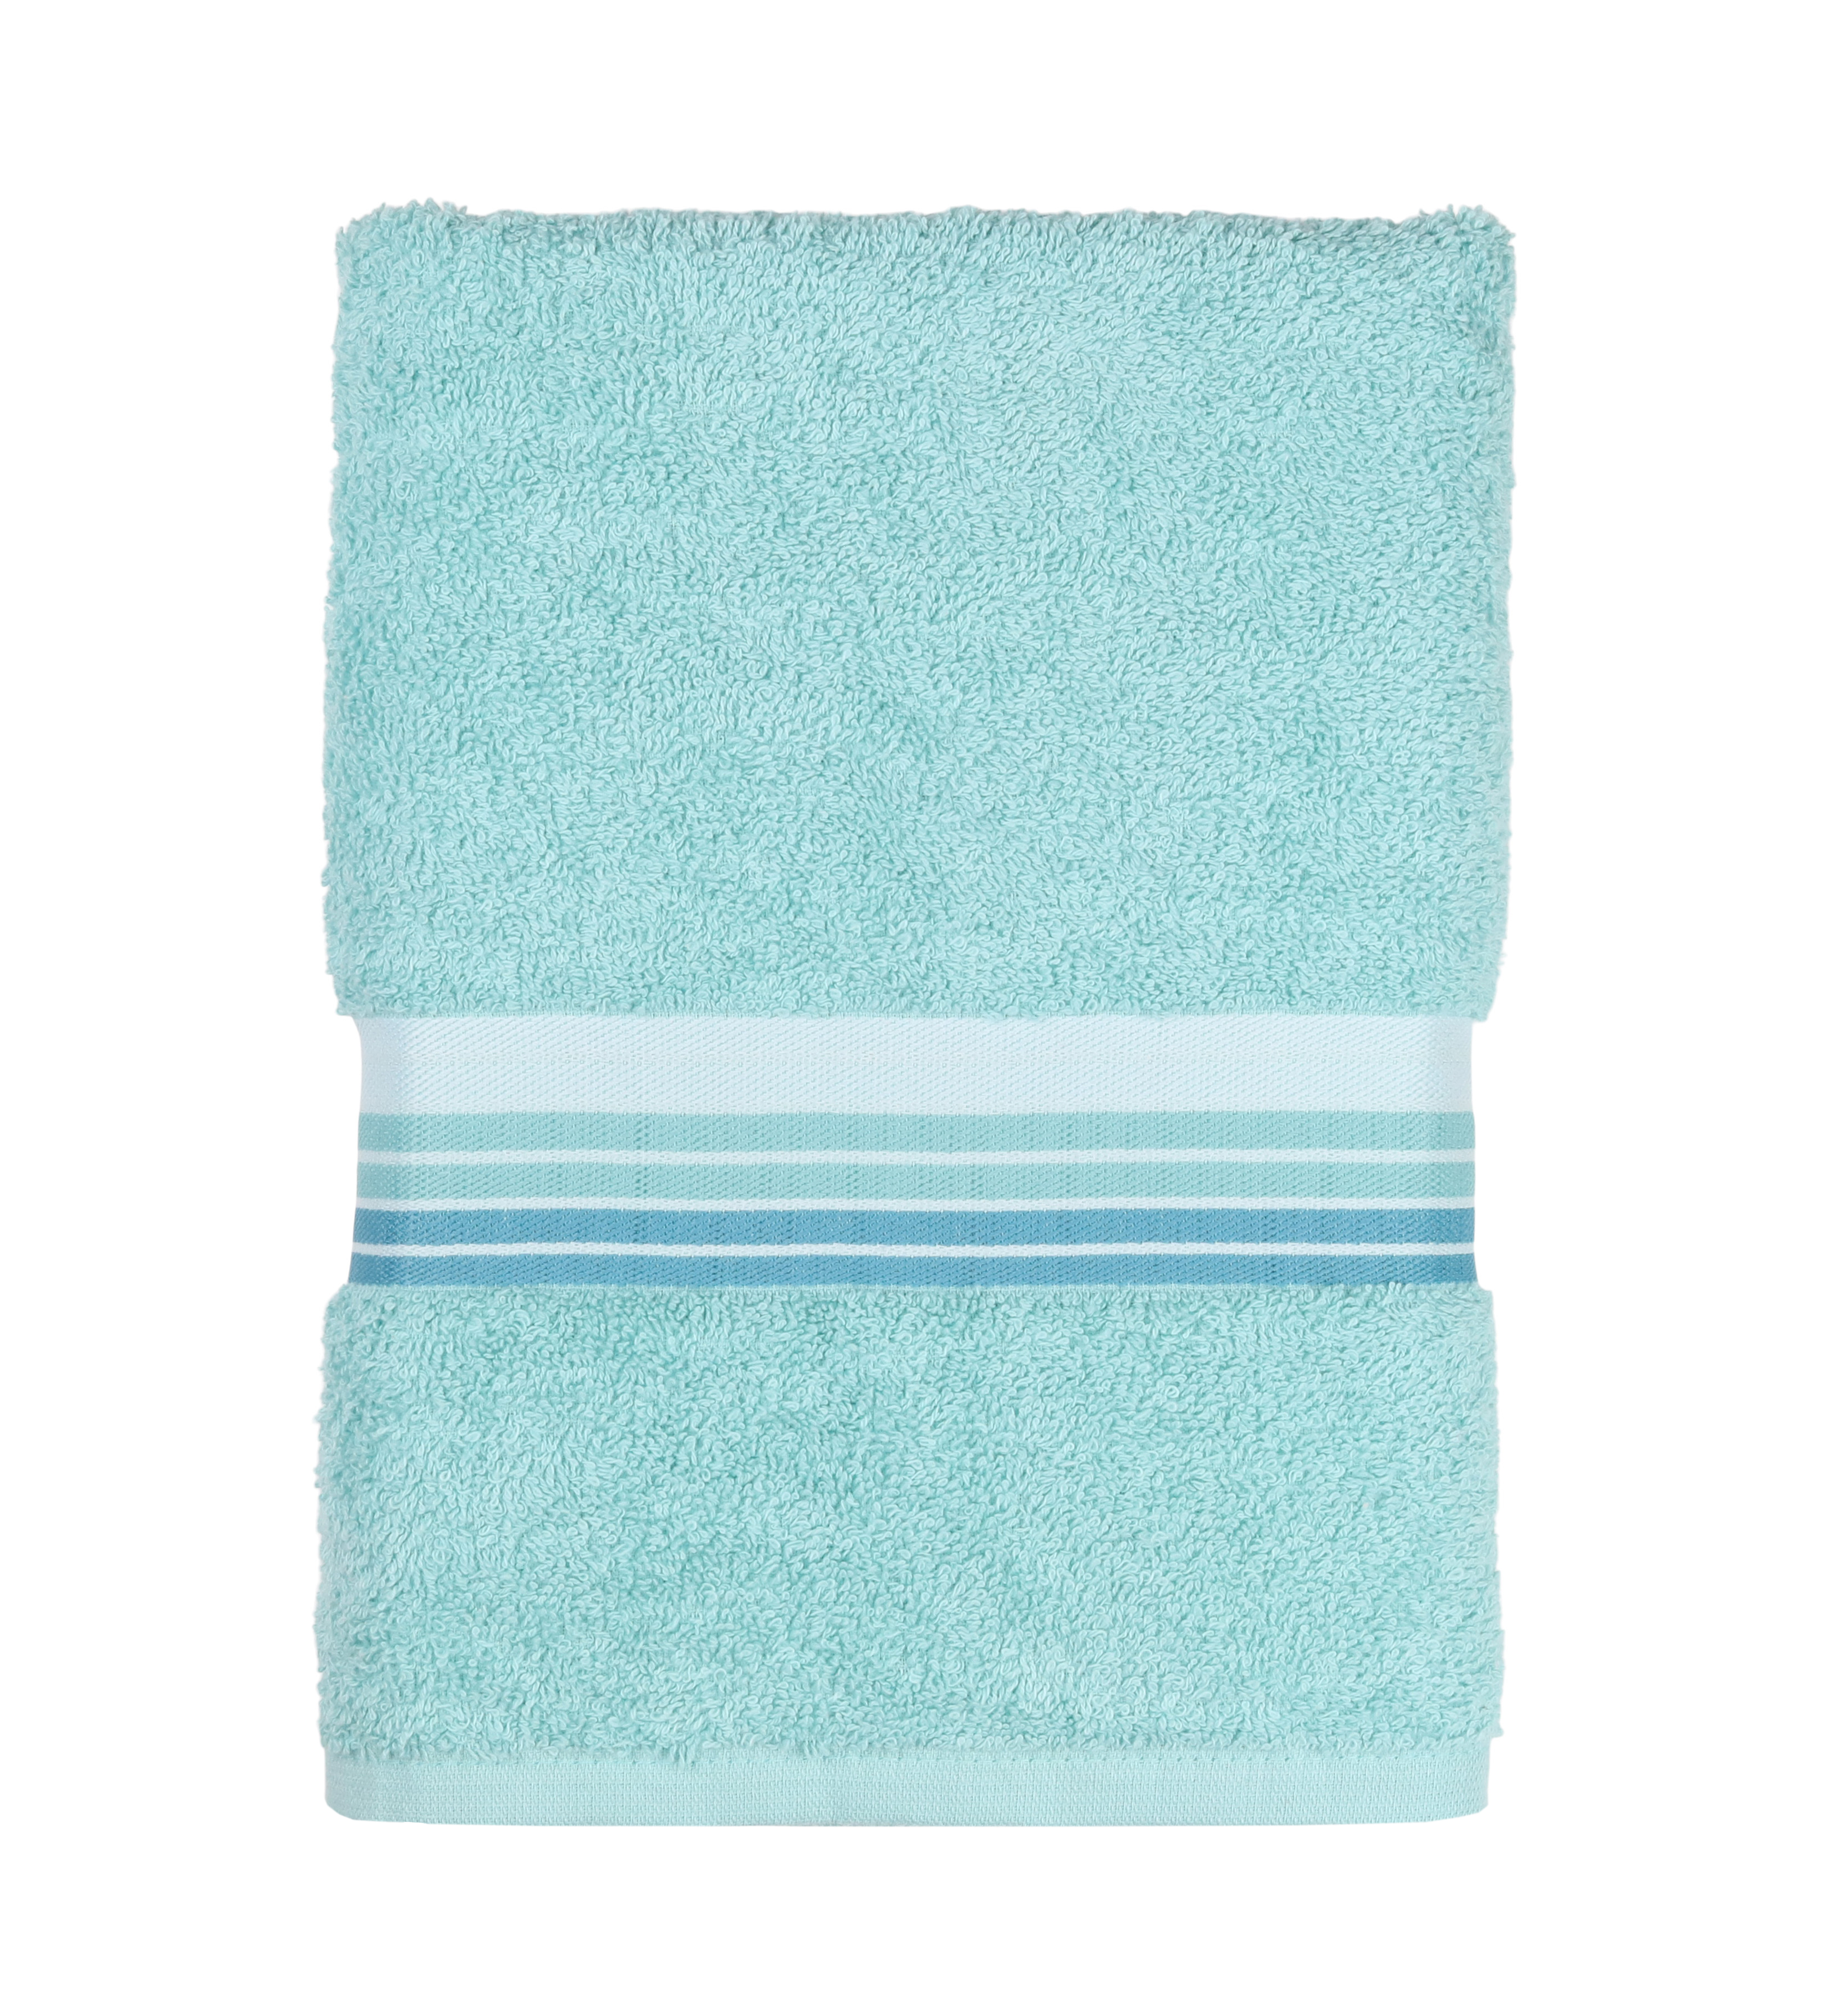 Mainstays Ombre Stripe Bath Towel, Clearly Aqua - image 1 of 9